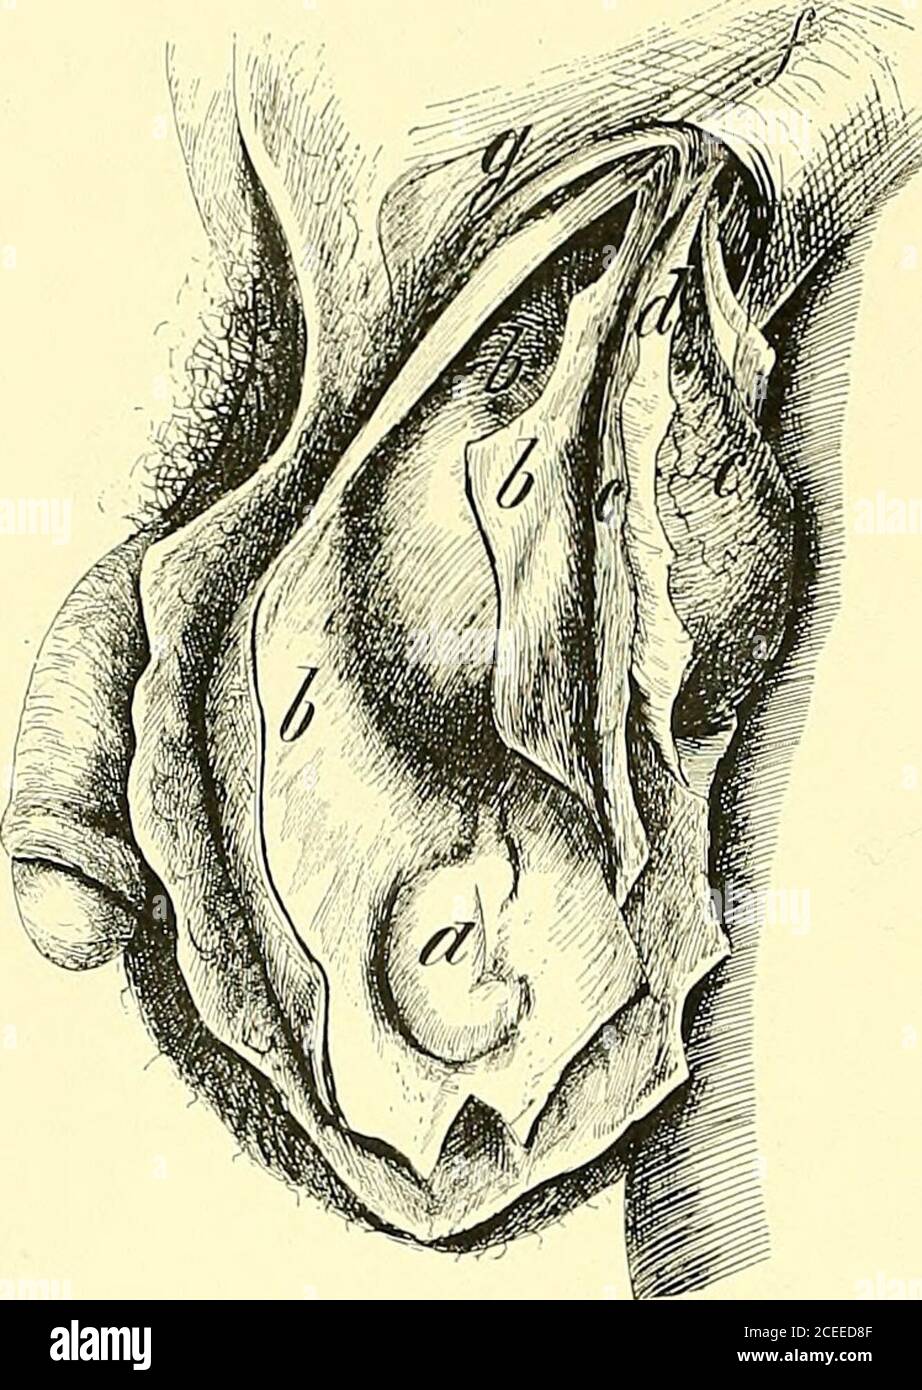 . The anatomy and surgical treatment of hernia. abdominal ring. , -„ i- r „ *- * b. Poupart s ligament. /, /. Intestine. t . 1 ur i a .- ^ a --^ c,c. Internal oblique muscle and its tendon. Figure 2, d. Transversalis passing over the hernial sac. a. Strangulated intestine, the sac cut open. ? fascia passing up to the transversalis. b. The adhesions of the tunica vaginalis to the f- Hernial sac below the abdominal ring,mouth of the sac S- The sac passing under the transversalis into the abdomen.?Tigute J. j^ Dotted lines marking the direction of the Hernia congenita. epigastric artery as it run Stock Photo